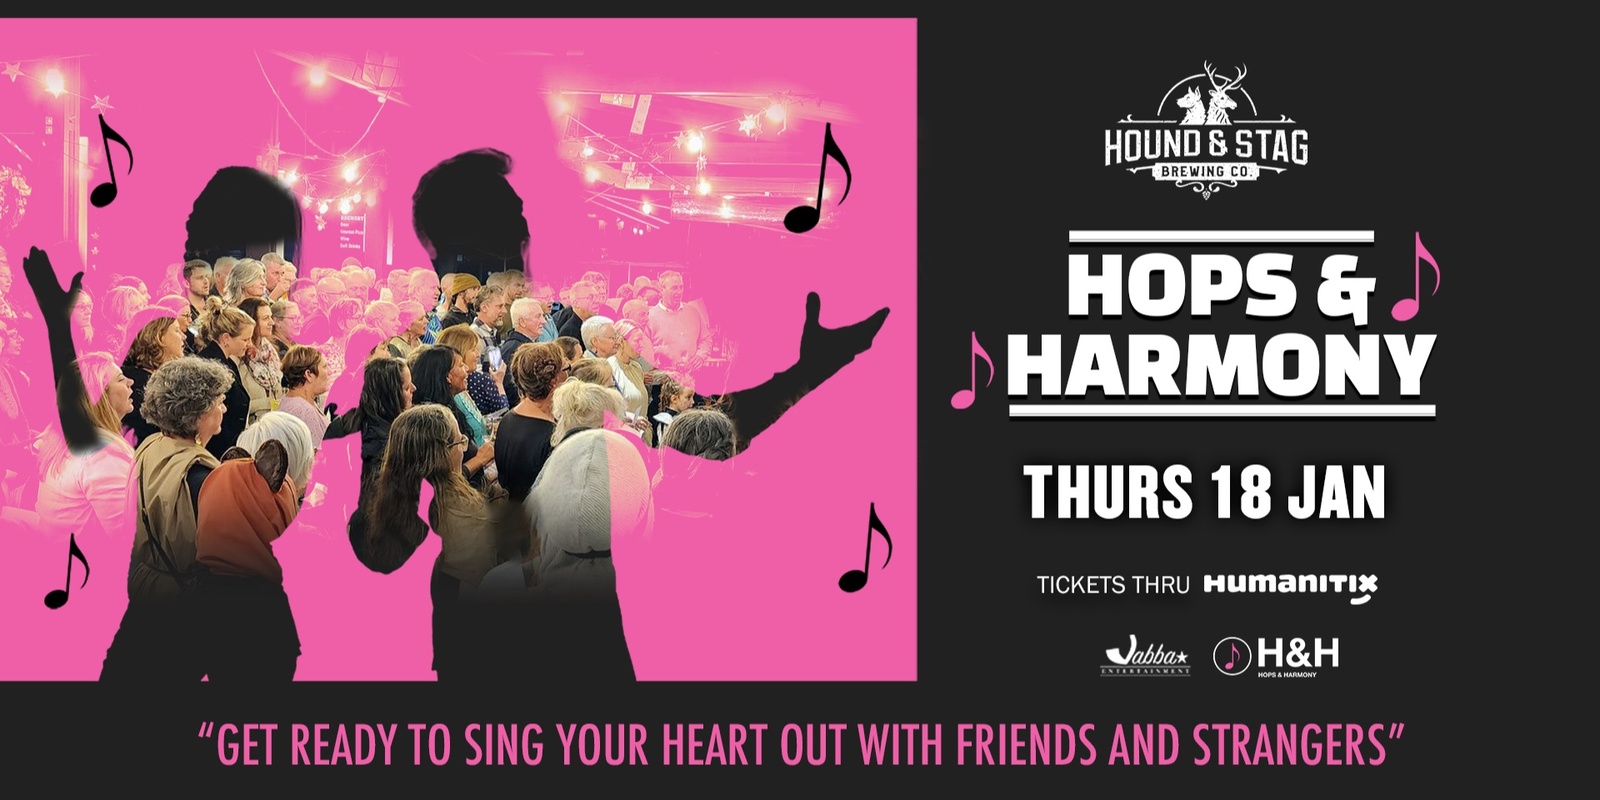 Banner image for Gold Coast - Hops & Harmony at Hound & Stag 